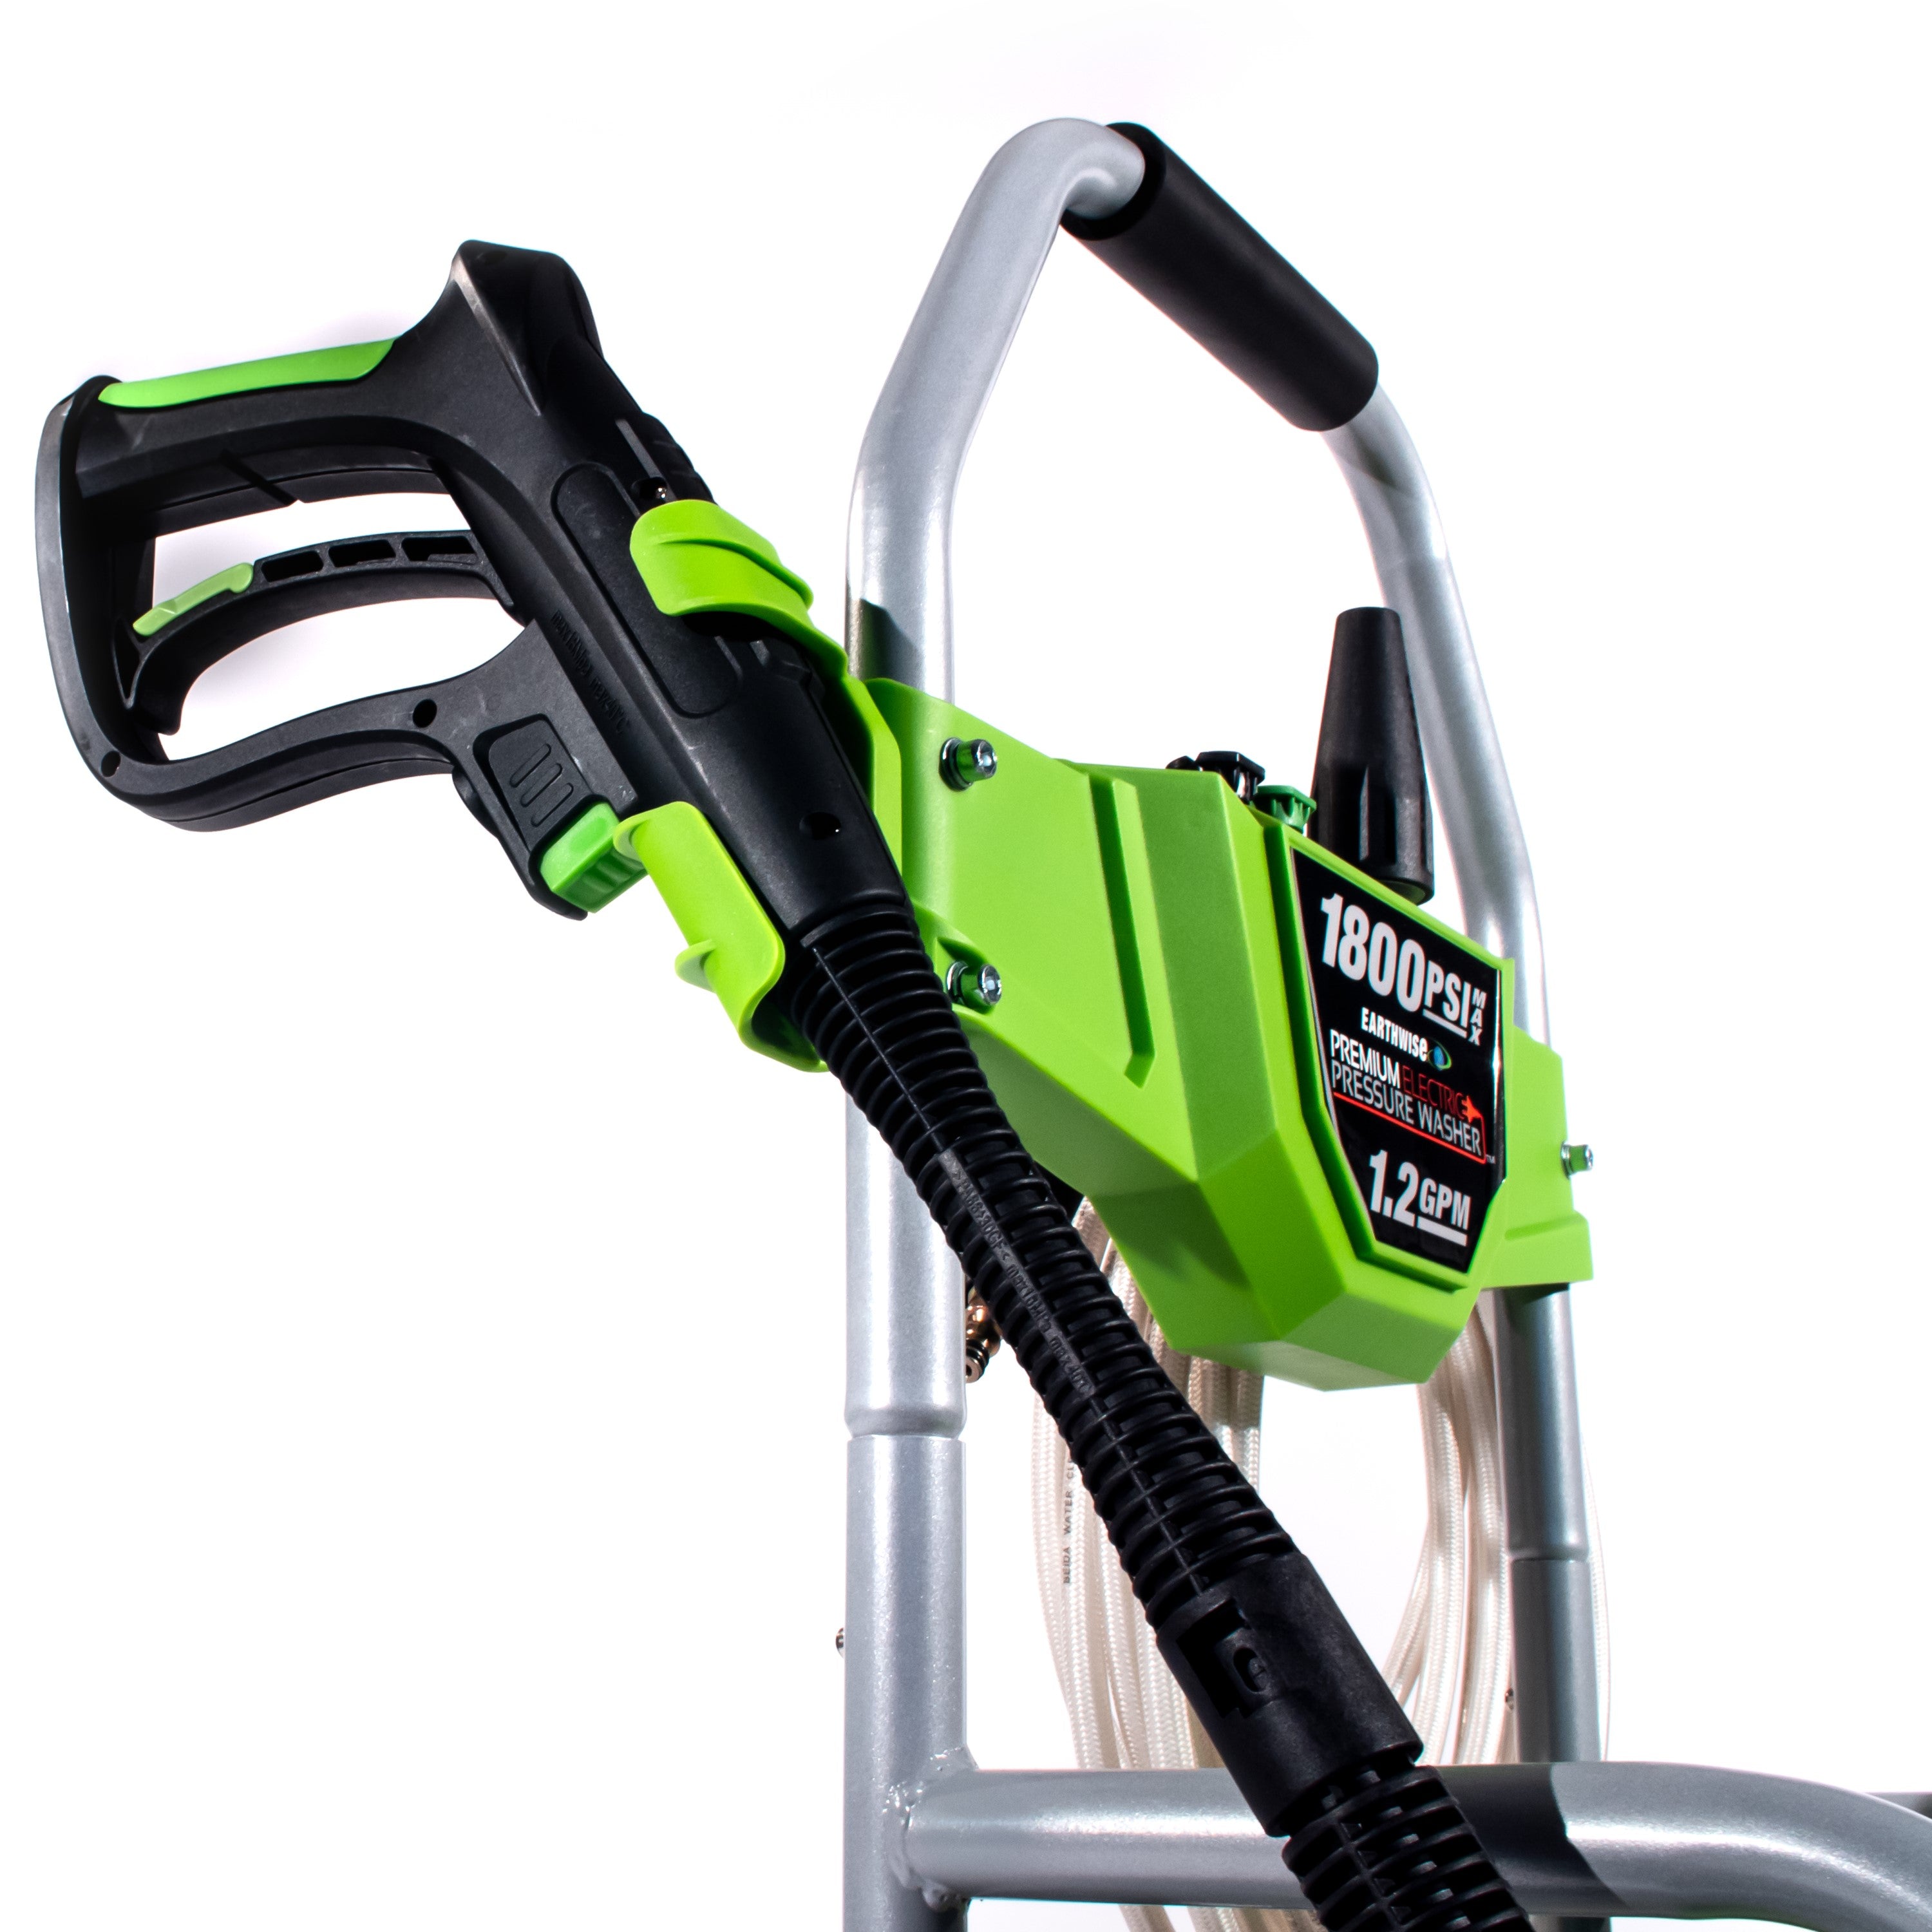 Earthwise Power Tools by ALM 1800 PSI 120V Corded Pressure Washer